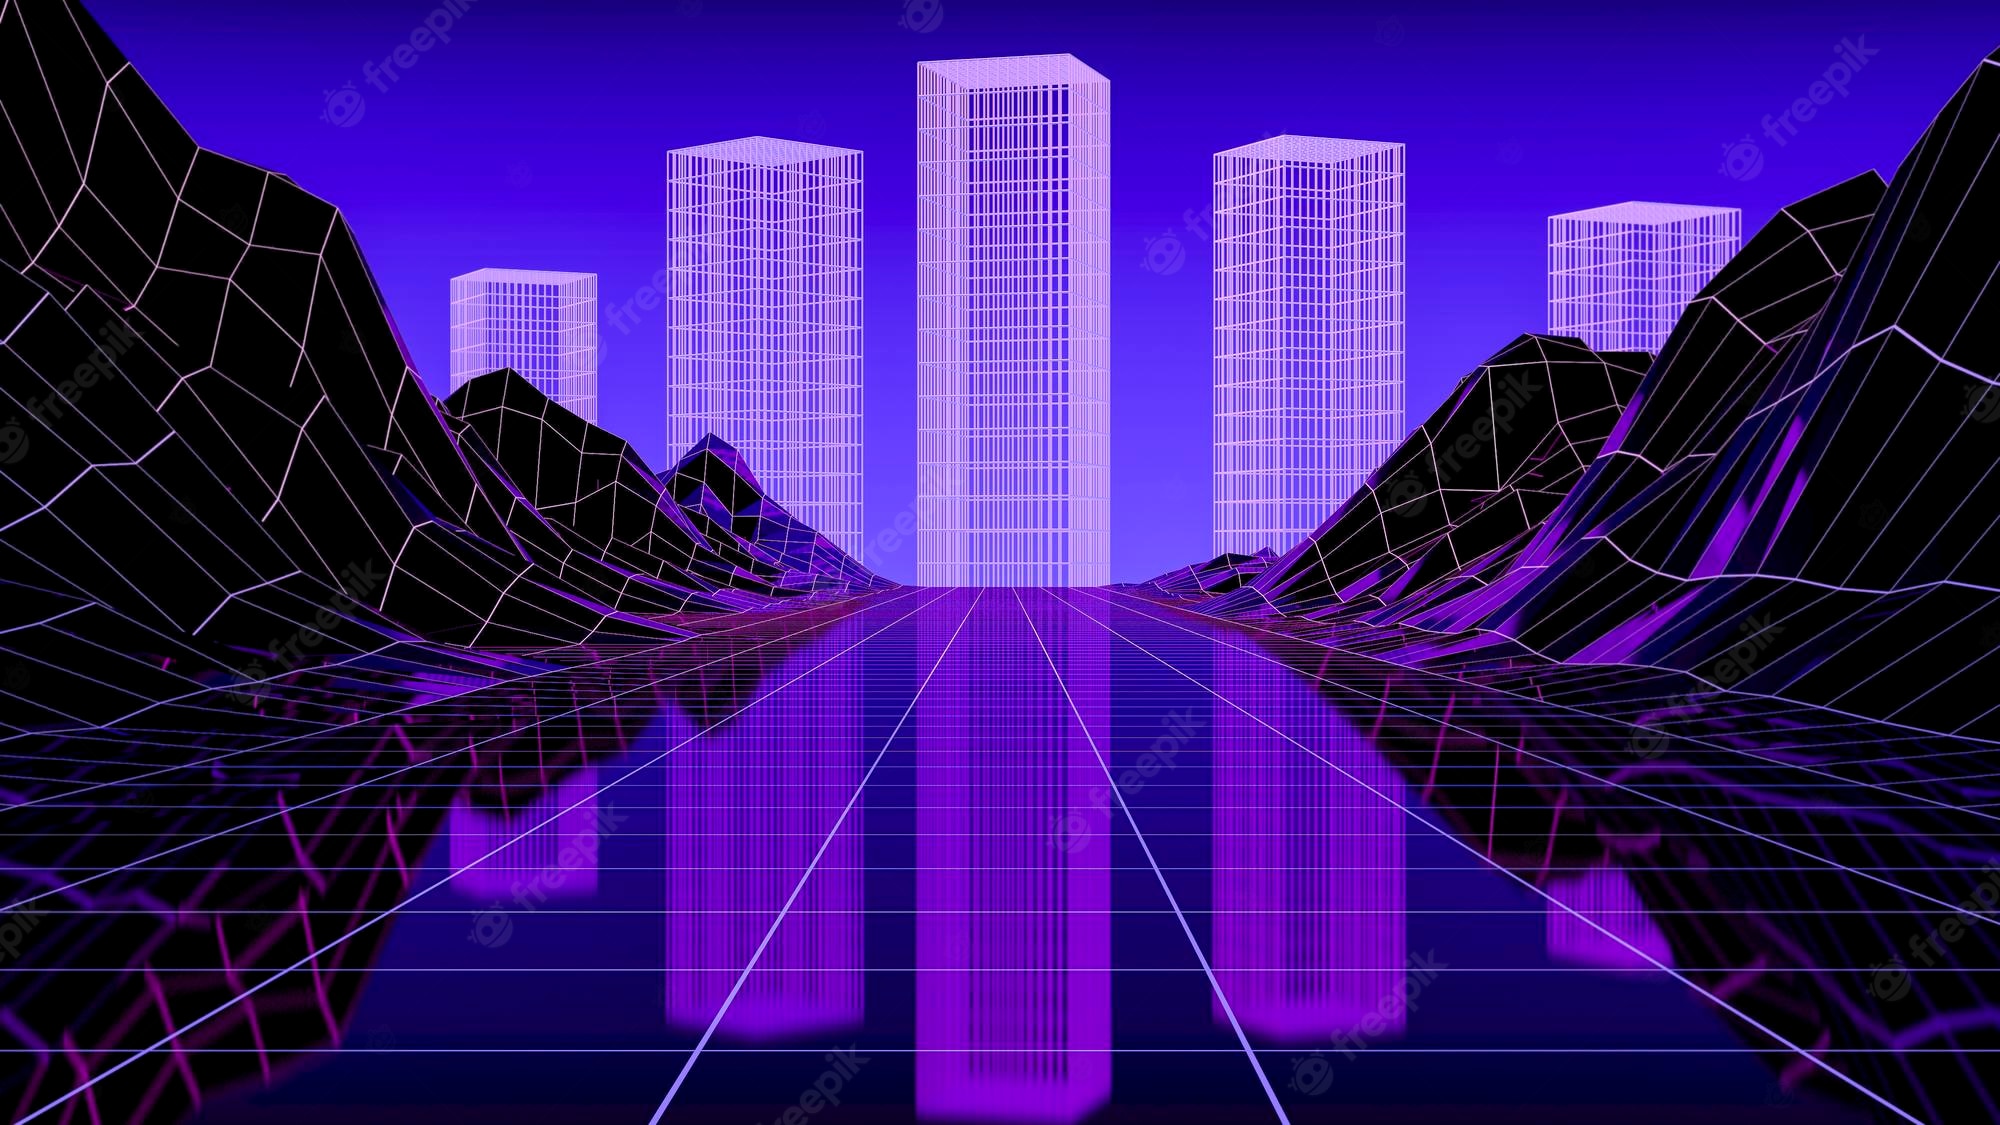 City Retrowave Synthwave Art Wallpapers